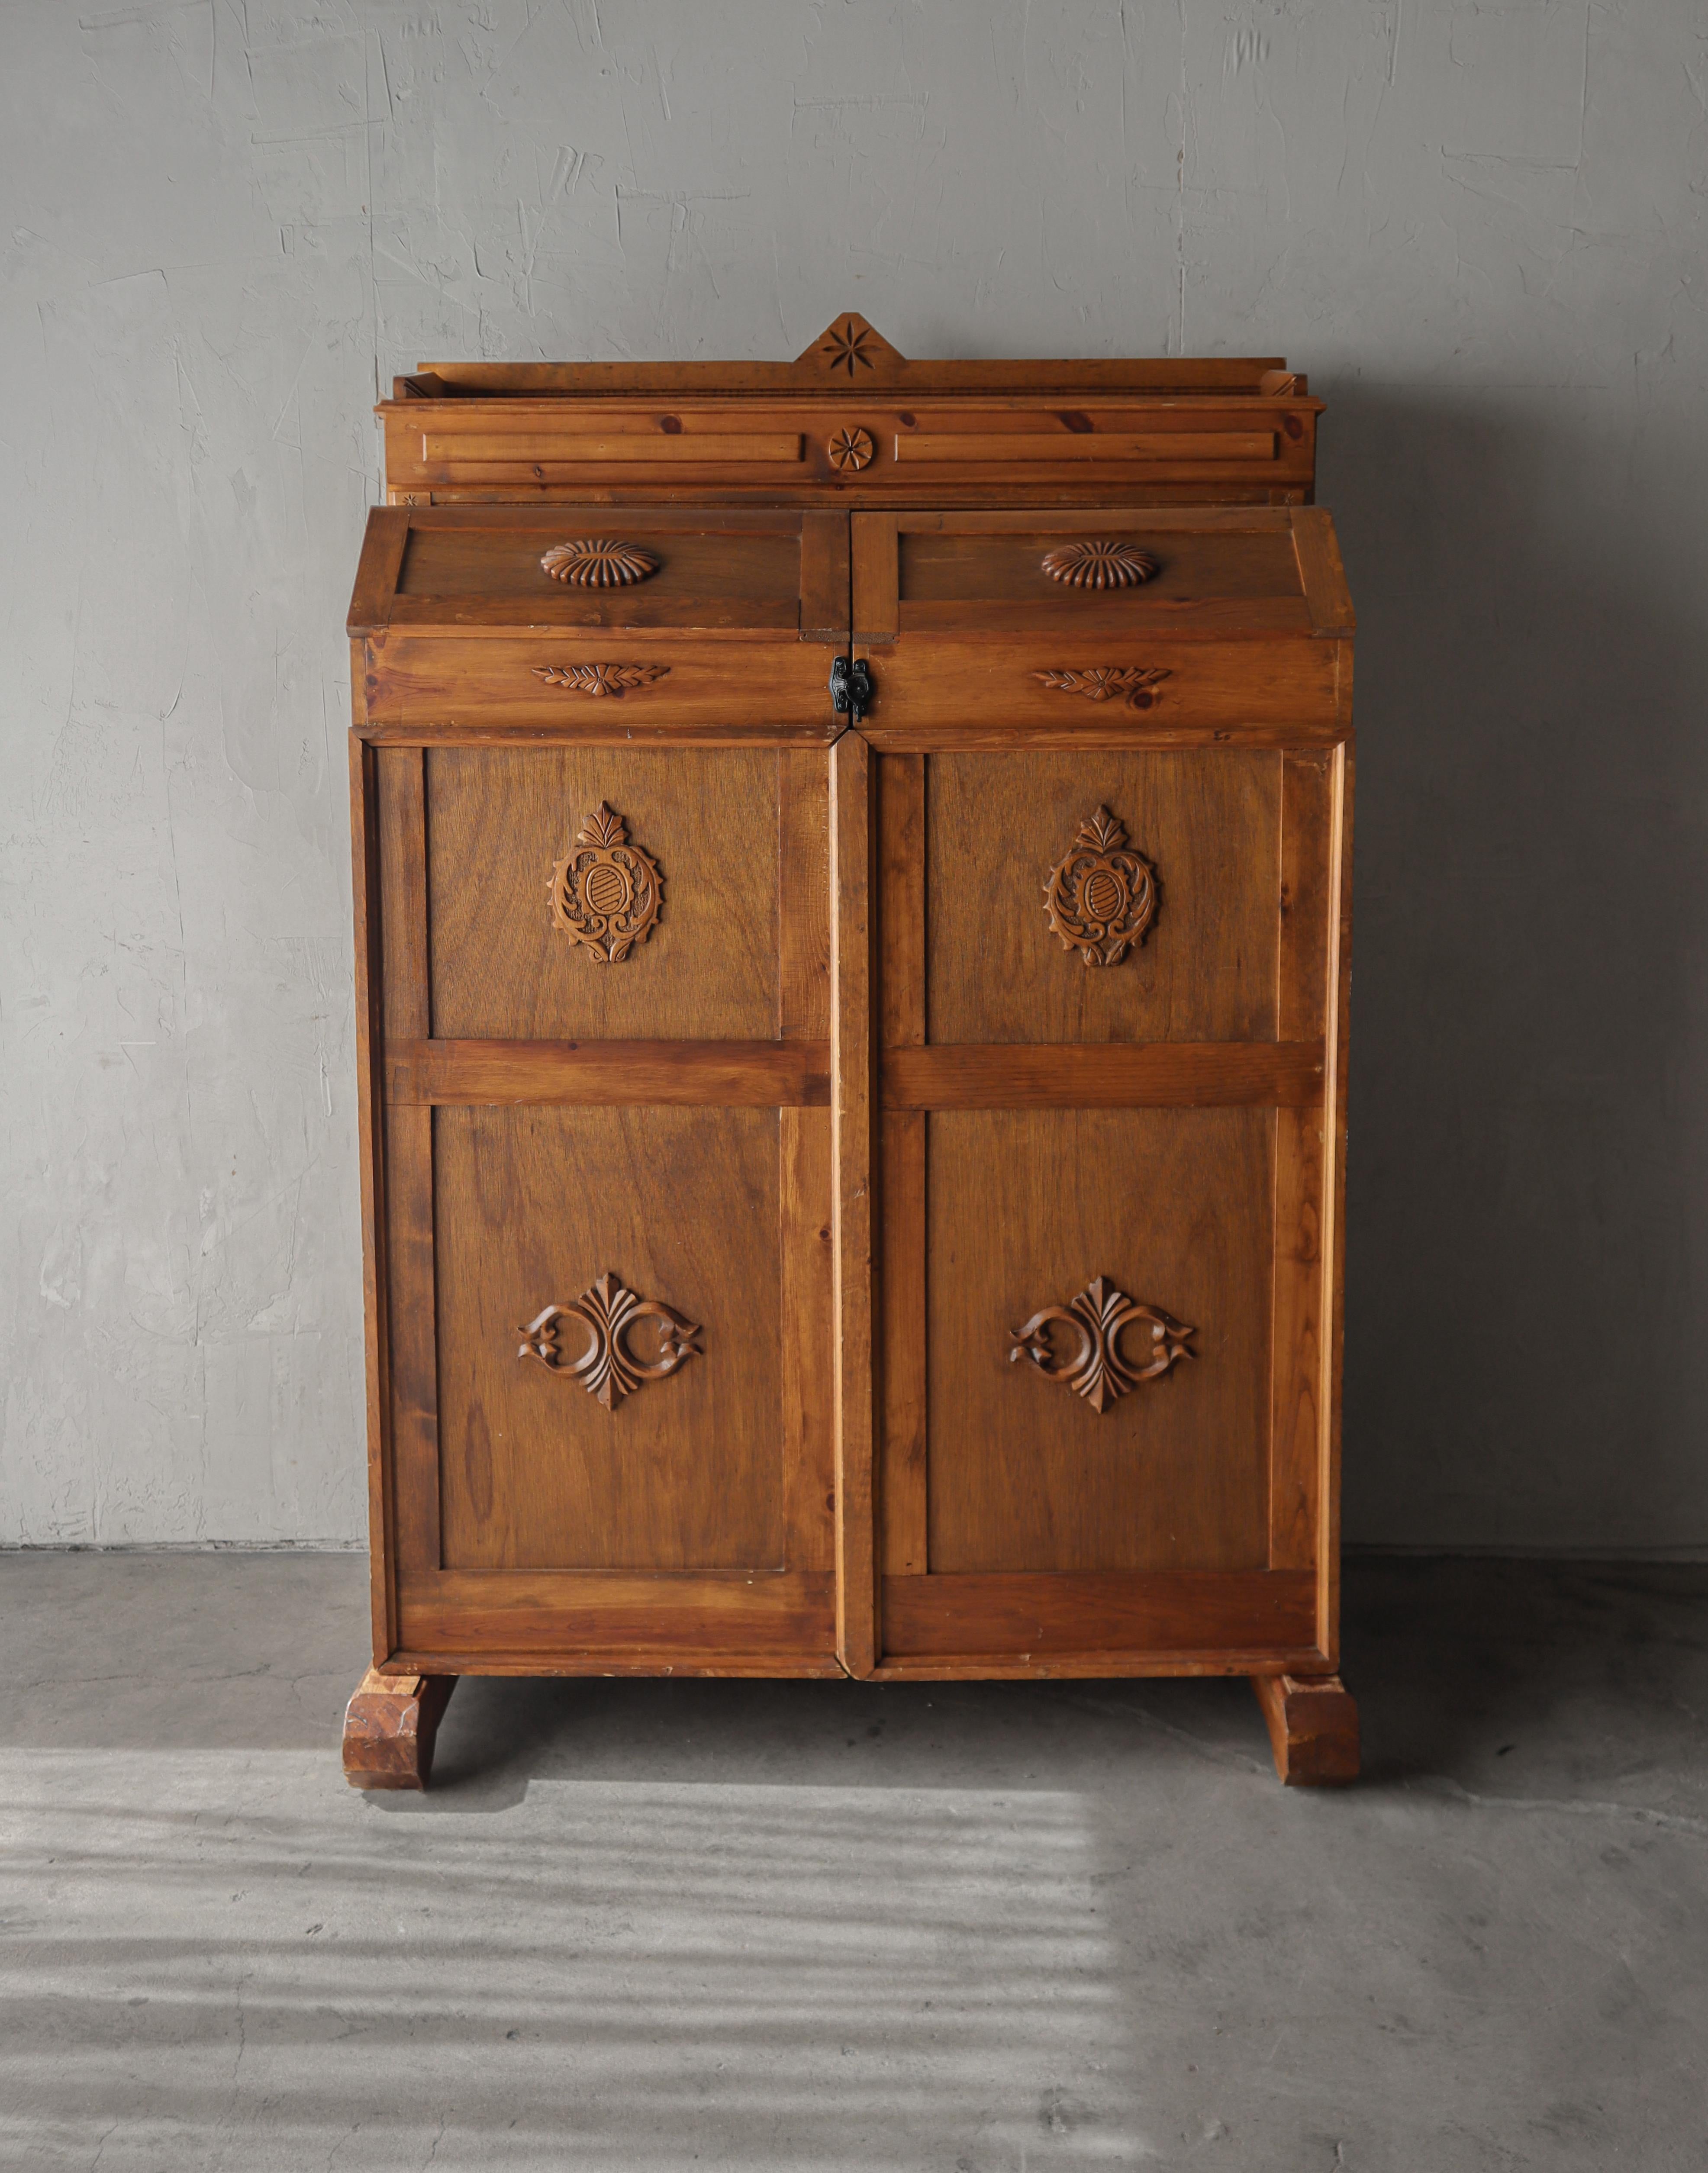 A beautiful example of an antique Wooten style desk cabinet, unlike any that I have ever seen.  This piece is massive in size and character, all the carved details make it so beautiful.  There are countless decades of gorgeous patina from age and